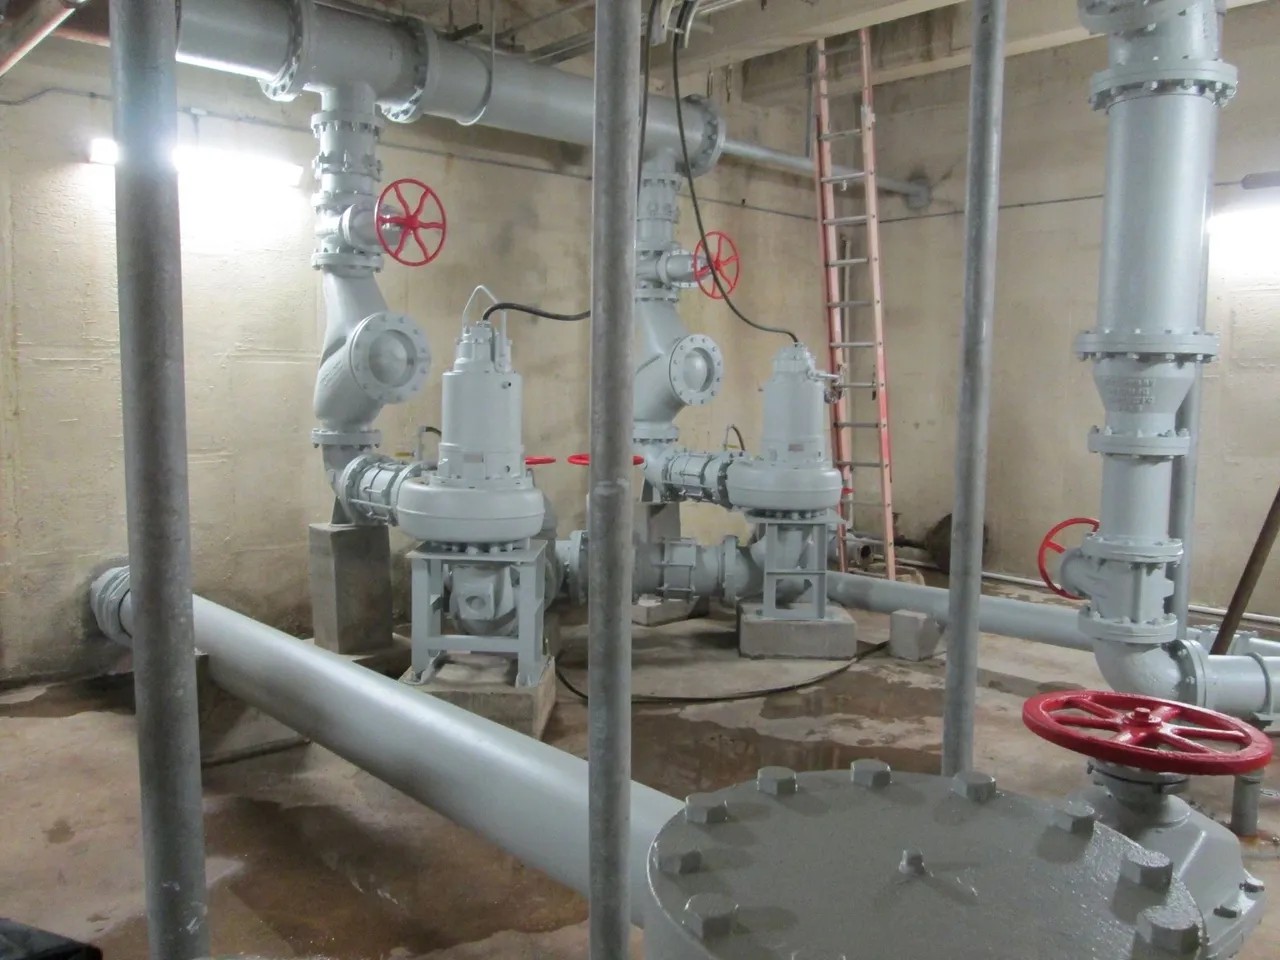 A large room with pipes and valves in it